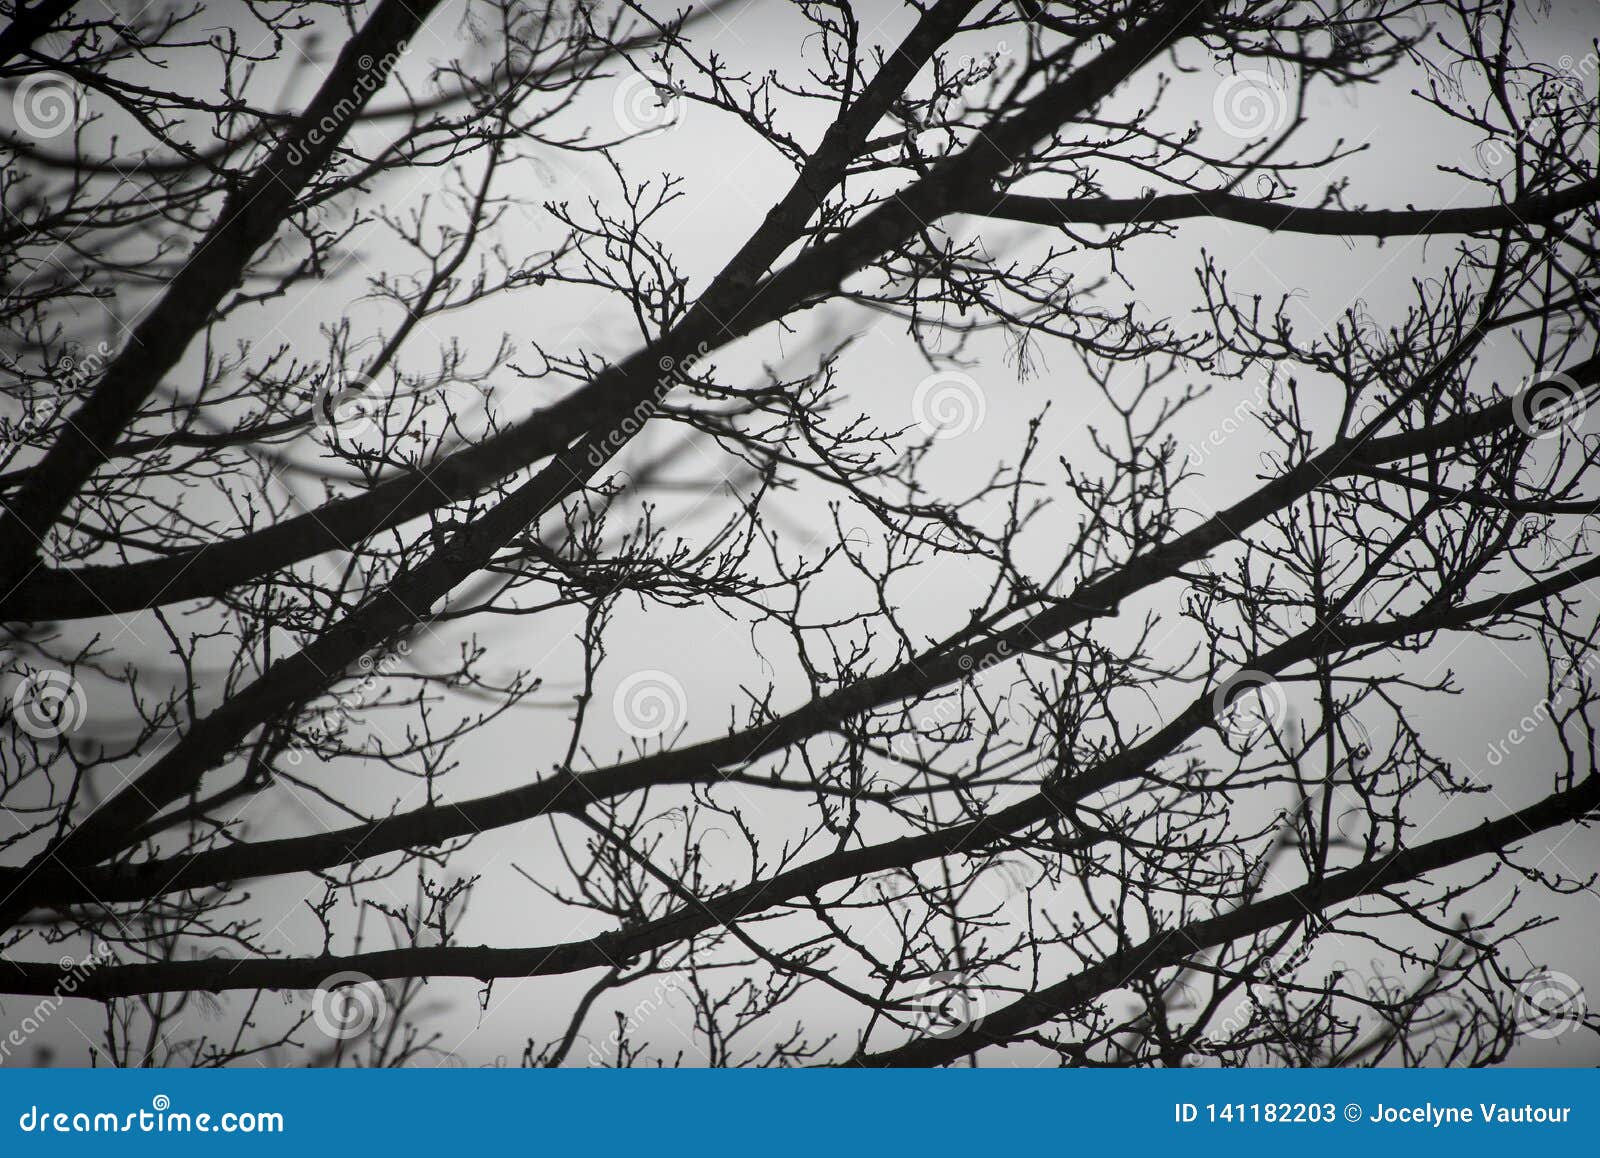 Haunting Branches on a Gloomy Day Stock Image - Image of bokeh